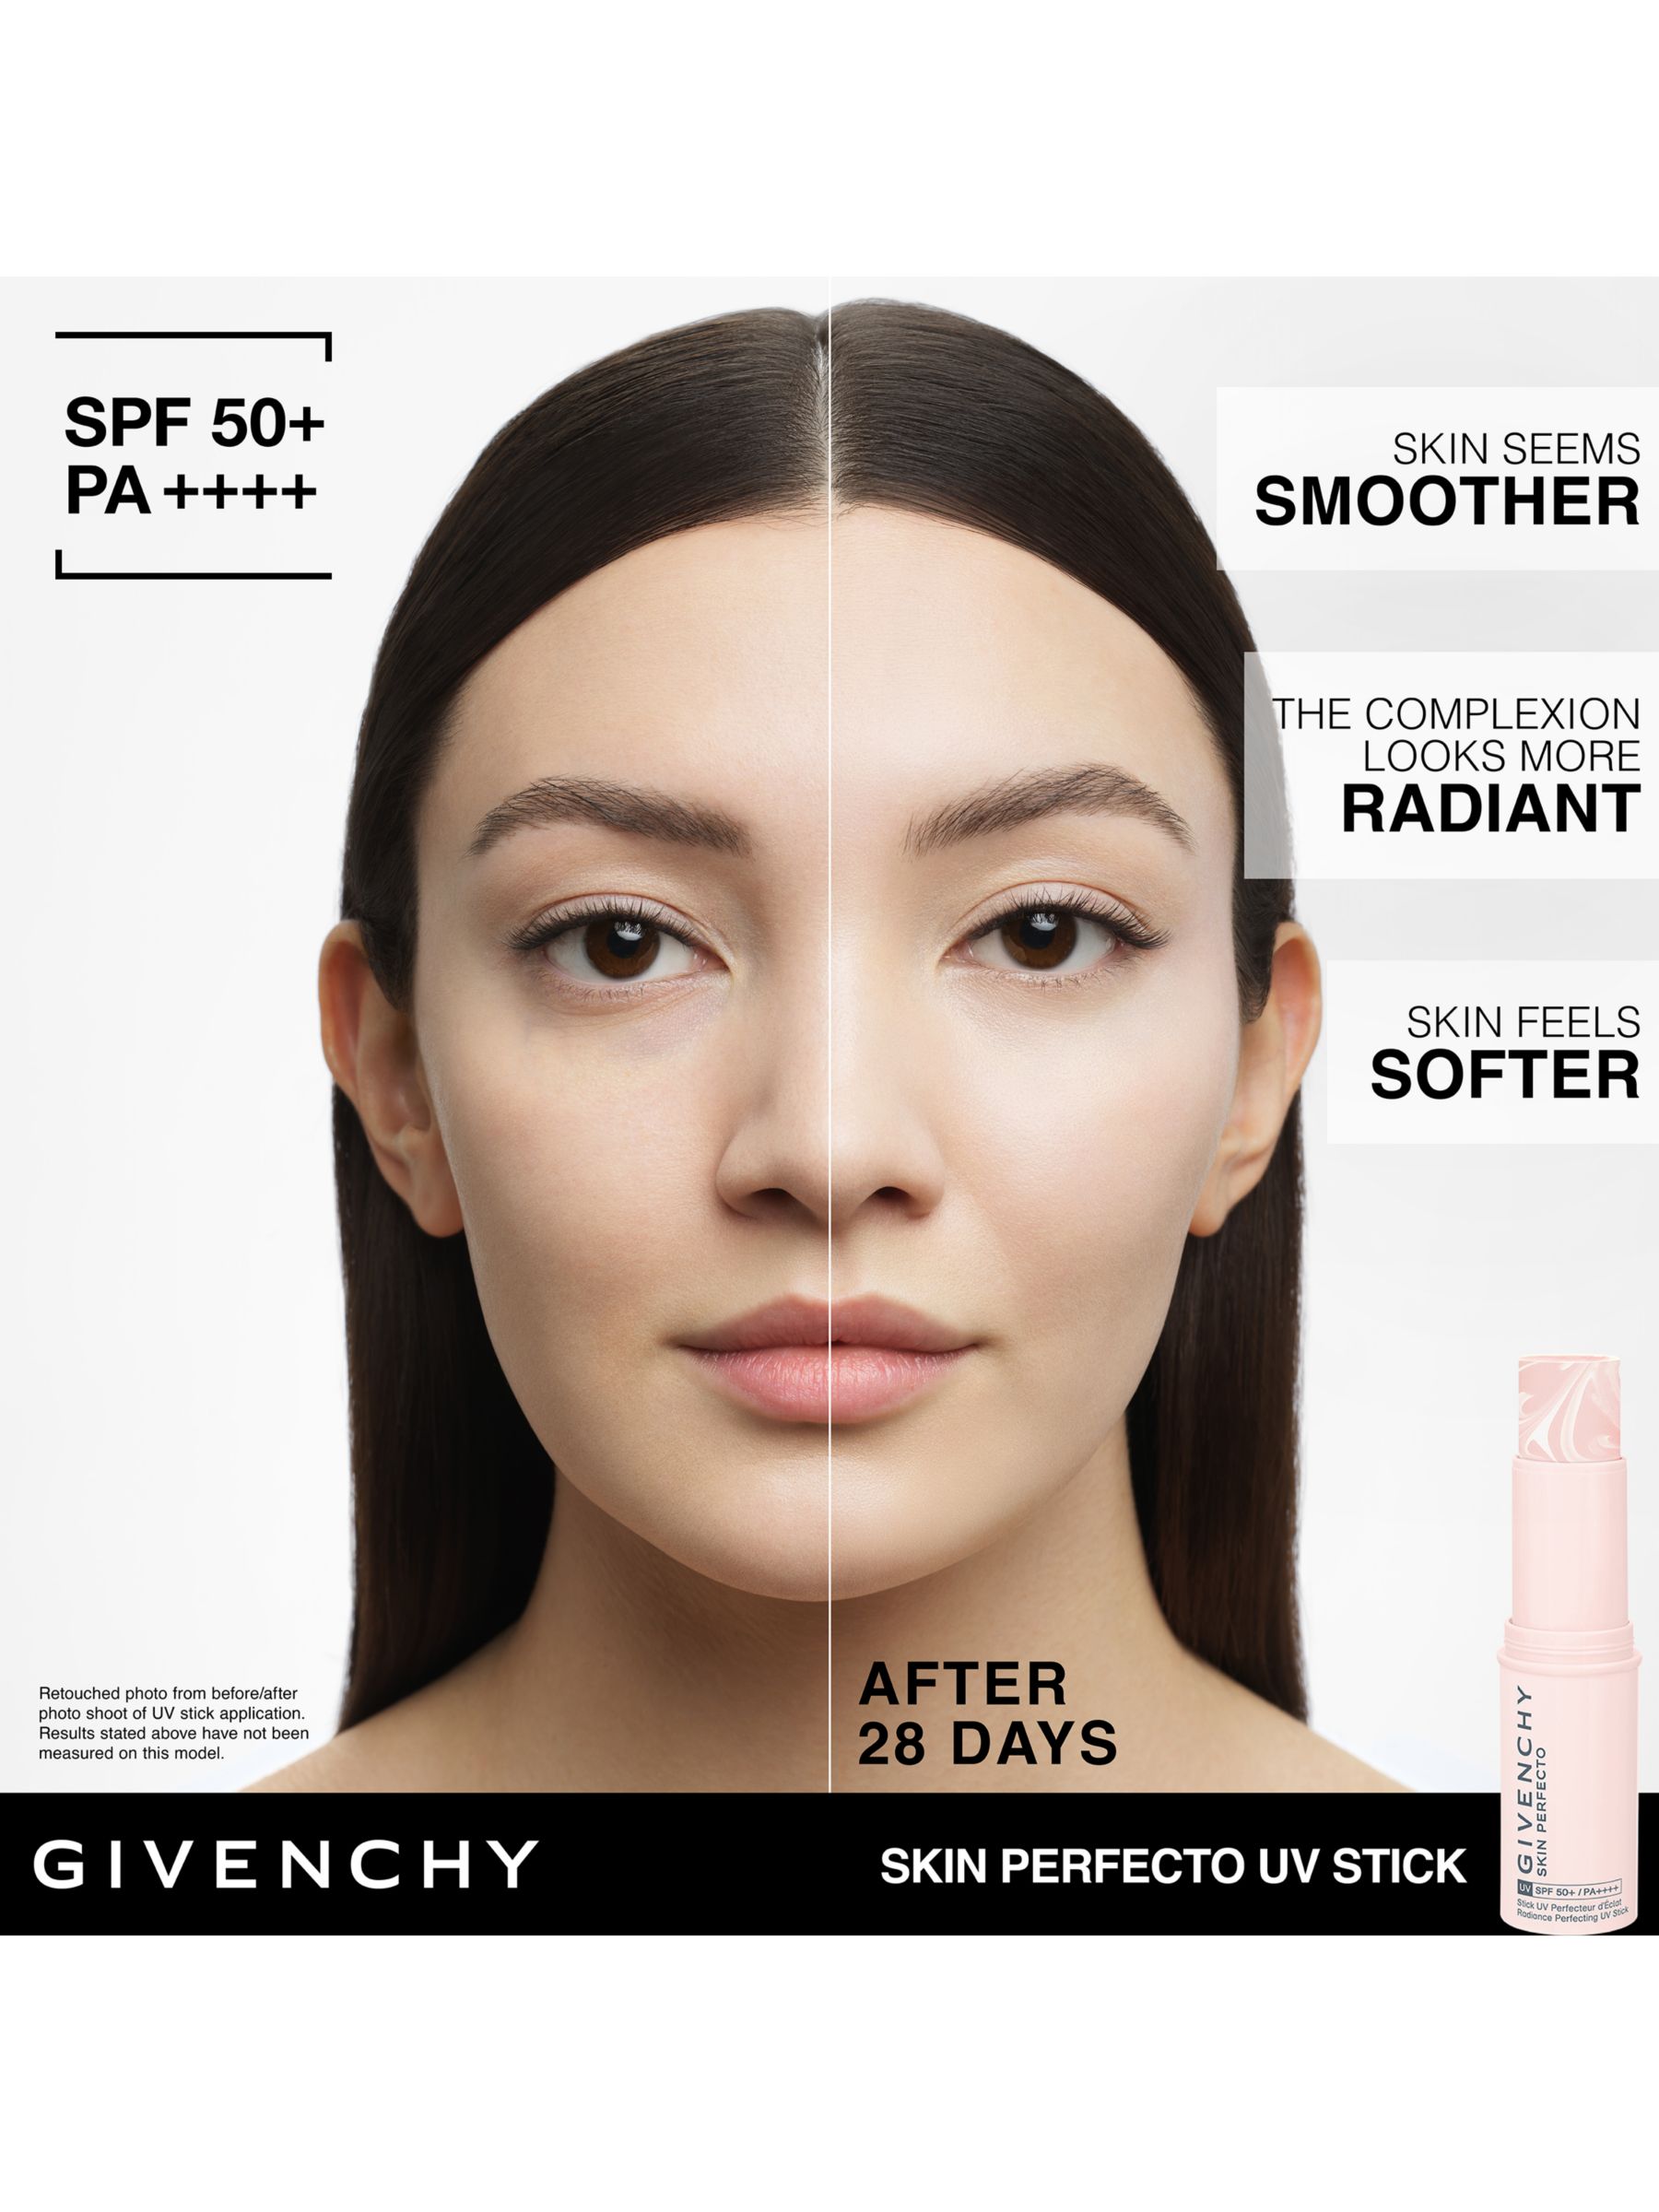 Givenchy Skin Perfecto Radiance Perfecting UV Stick with SPF 50+ PA++++, 11g 2